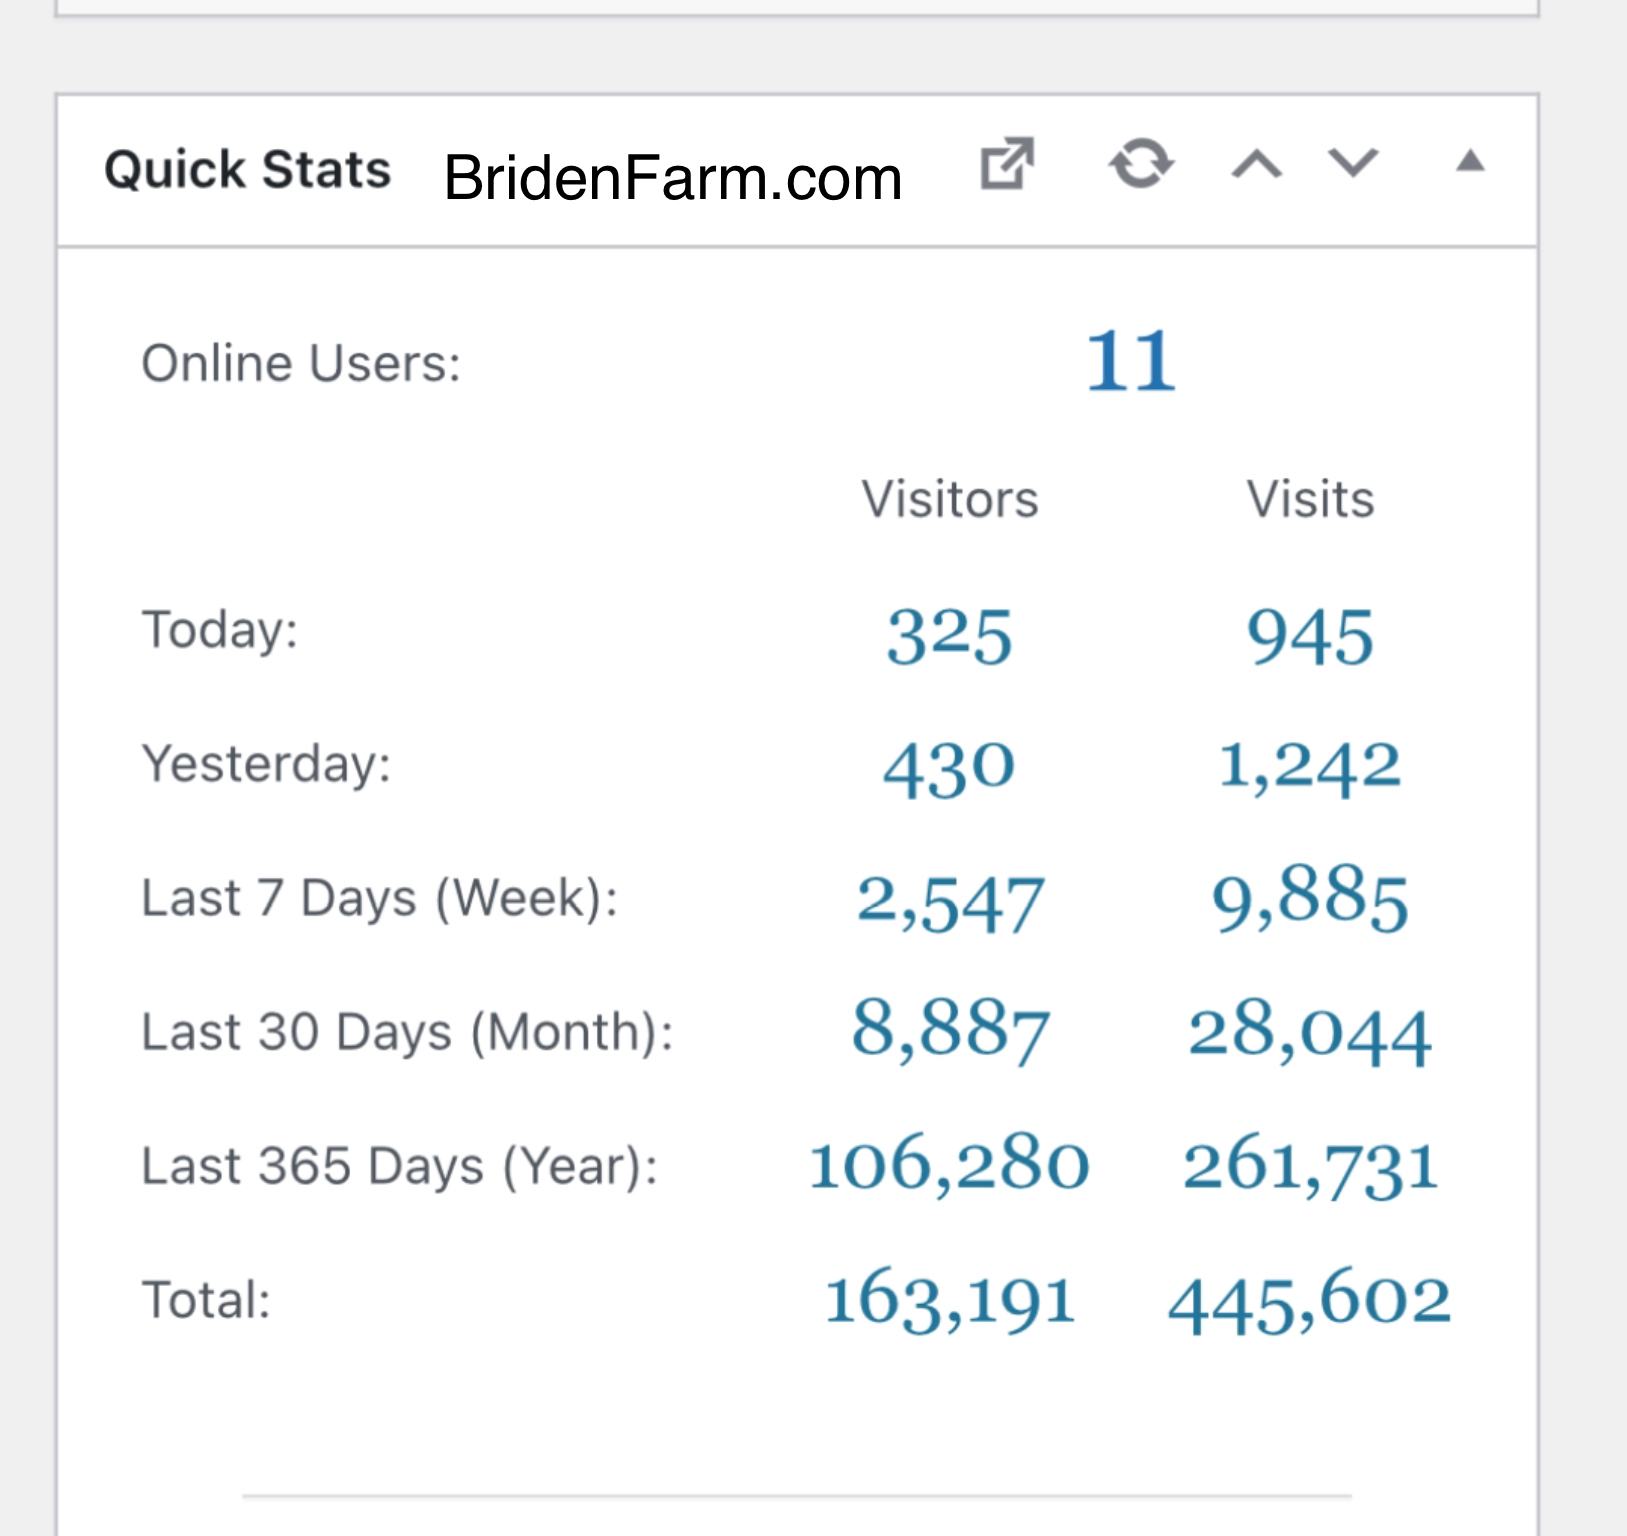 Over 250,000 Visits